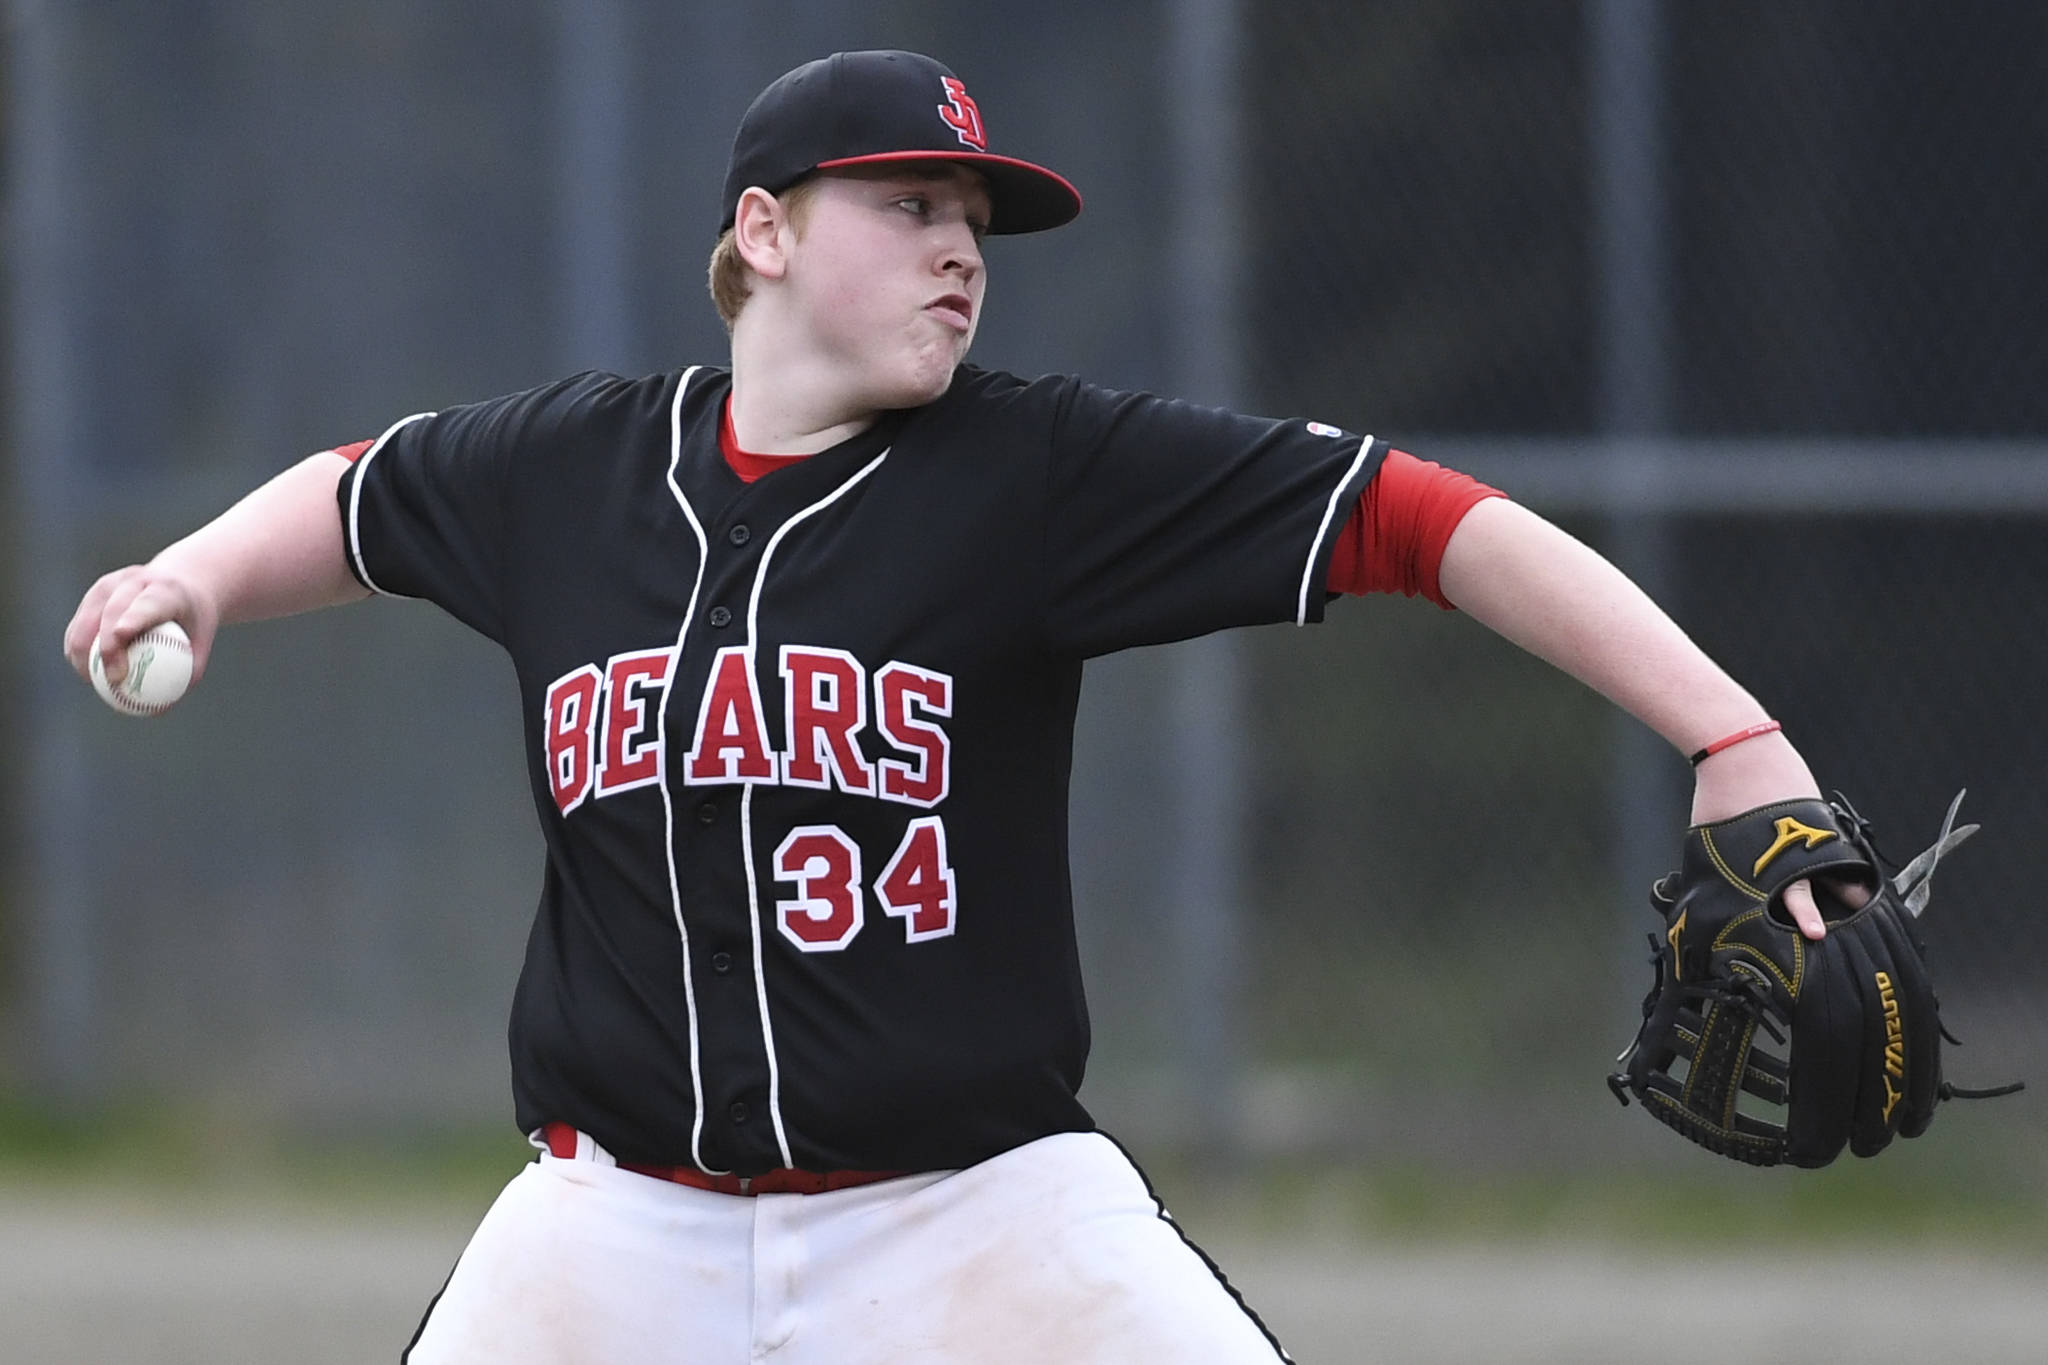 Juneau-Douglas’ Christian Ludeman pitches against Ketchikan in the third inning at Adair-Kennedy Memorial Park on Friday, May 10, 2019. (Michael Penn | Juneau Empire)